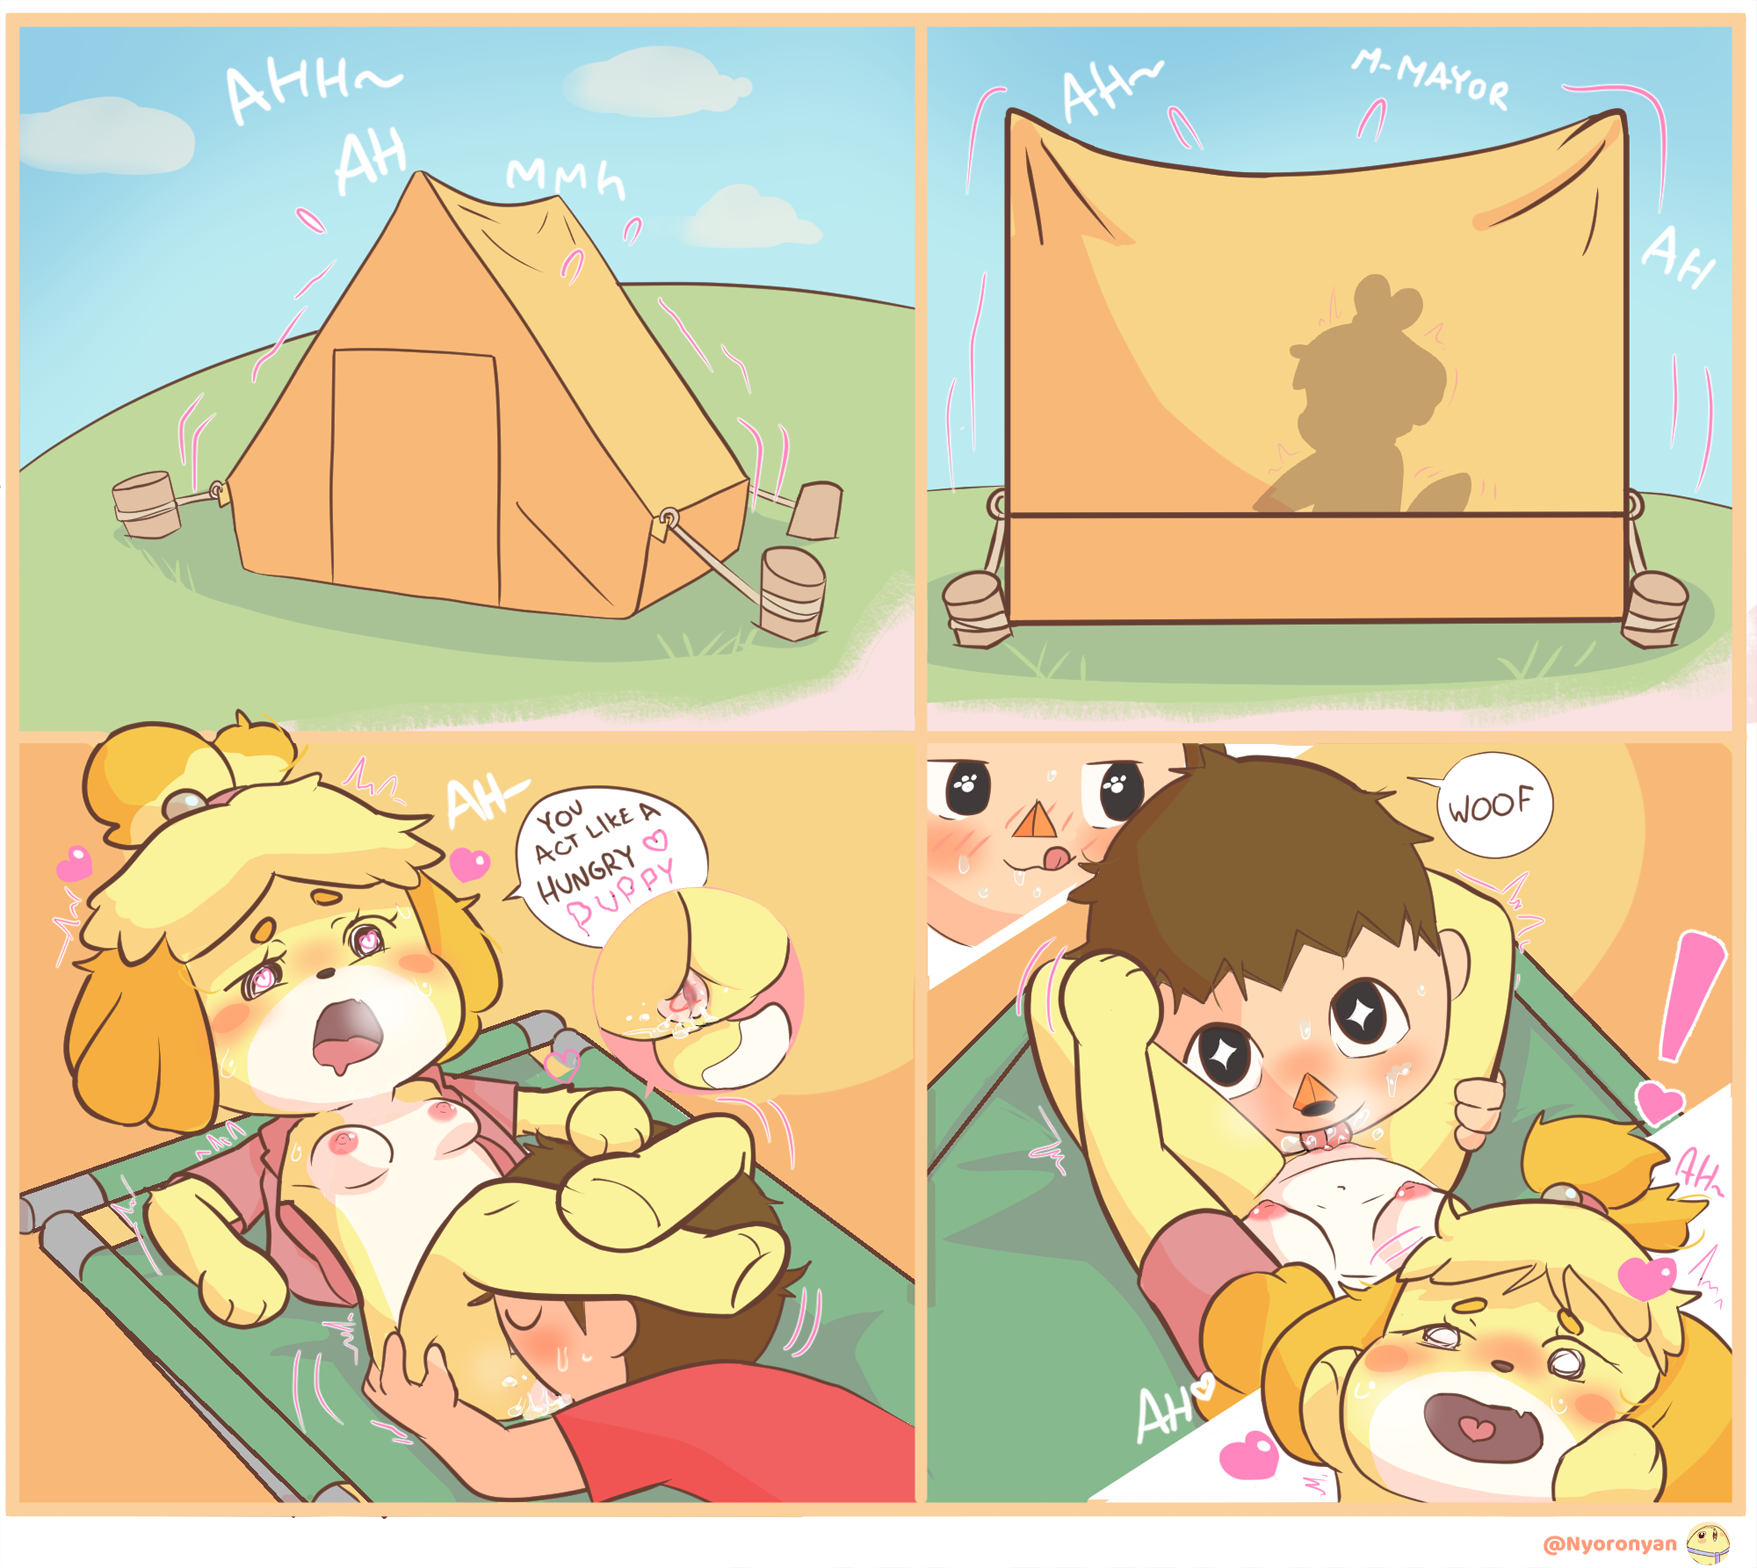 Animal crossing villager and isabelle day off porn comic